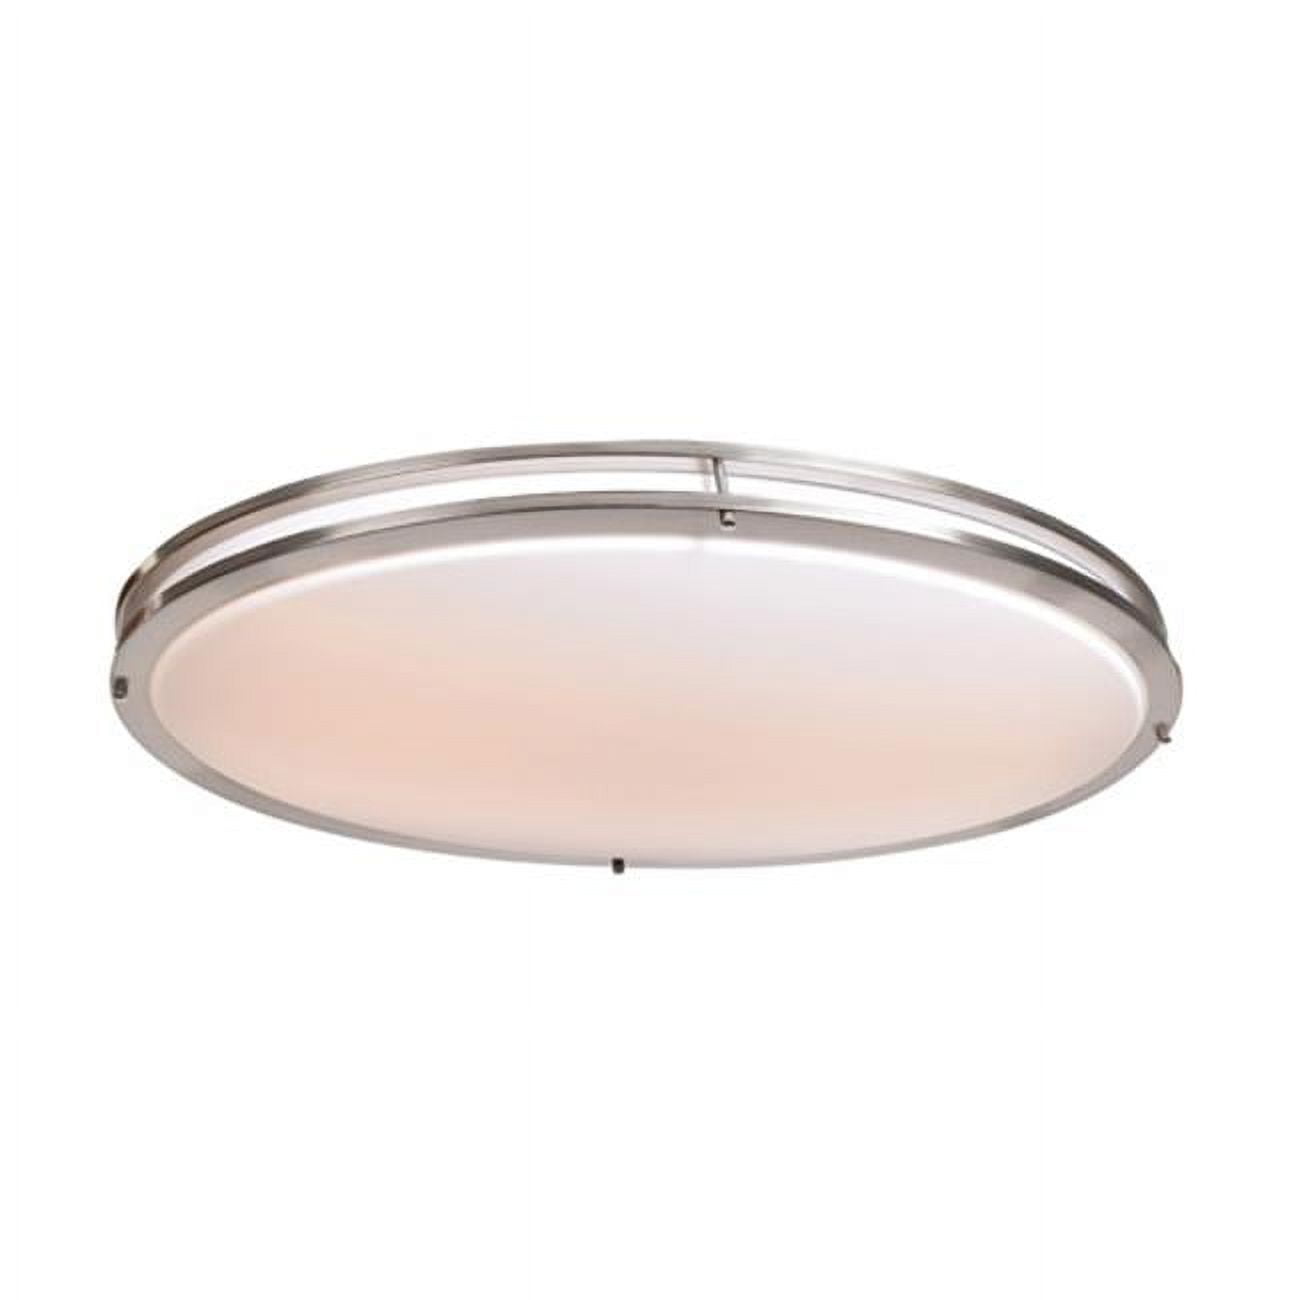 Picture of Access Lighting 20468LEDD-BS-ACR 33 in . Solero Oval LED Brushed Steel Flush Mount Ceiling Light